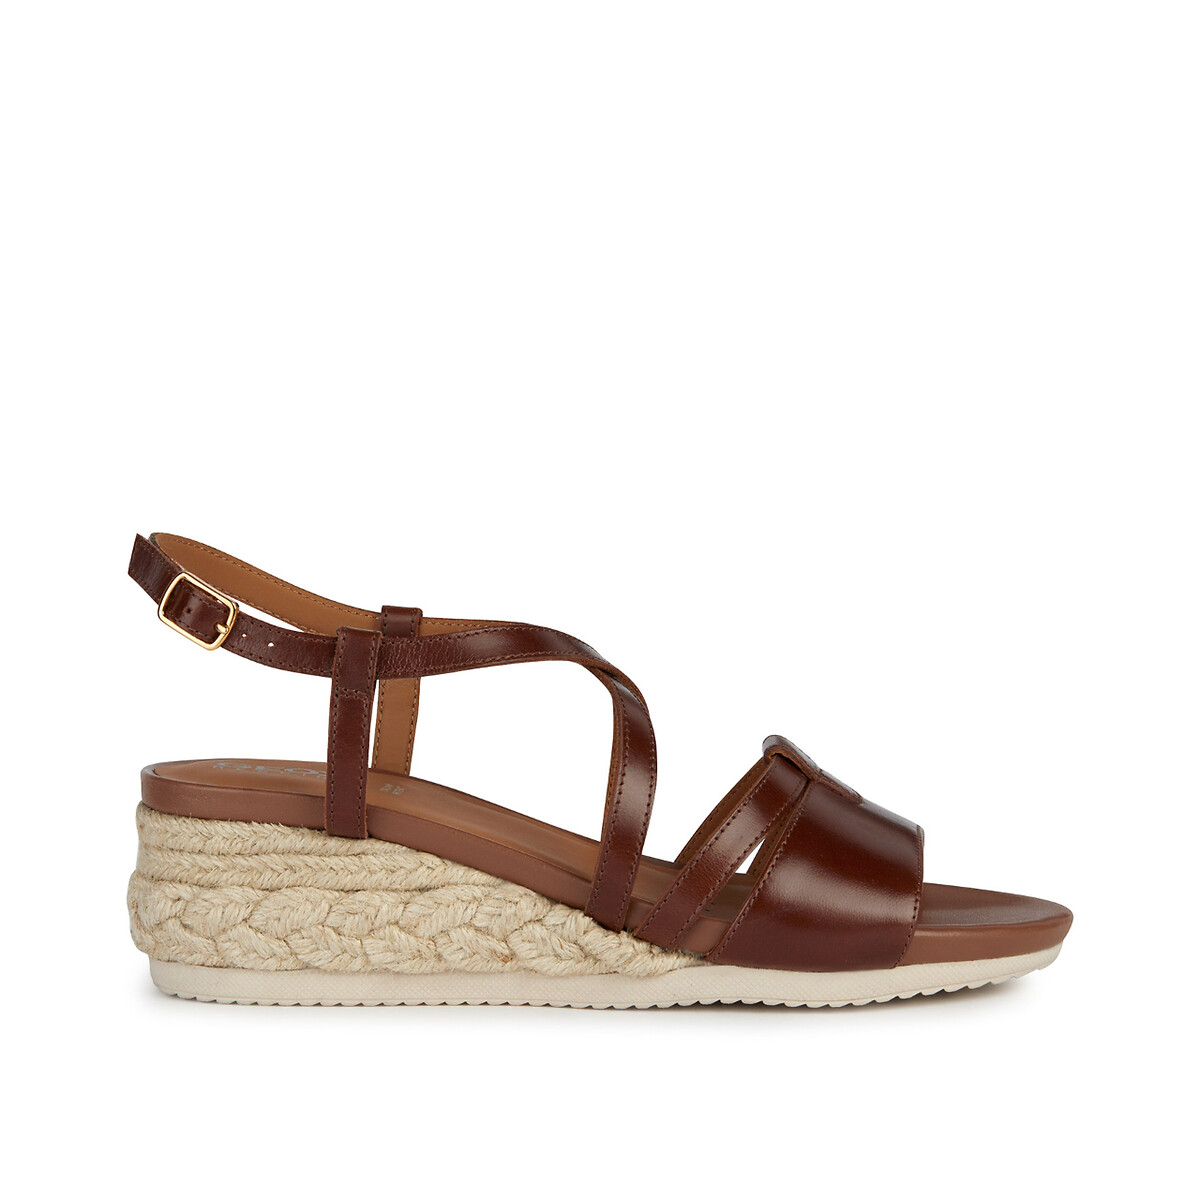 Ischia corda breathable wedge sandals in leather Geox | La Redoute